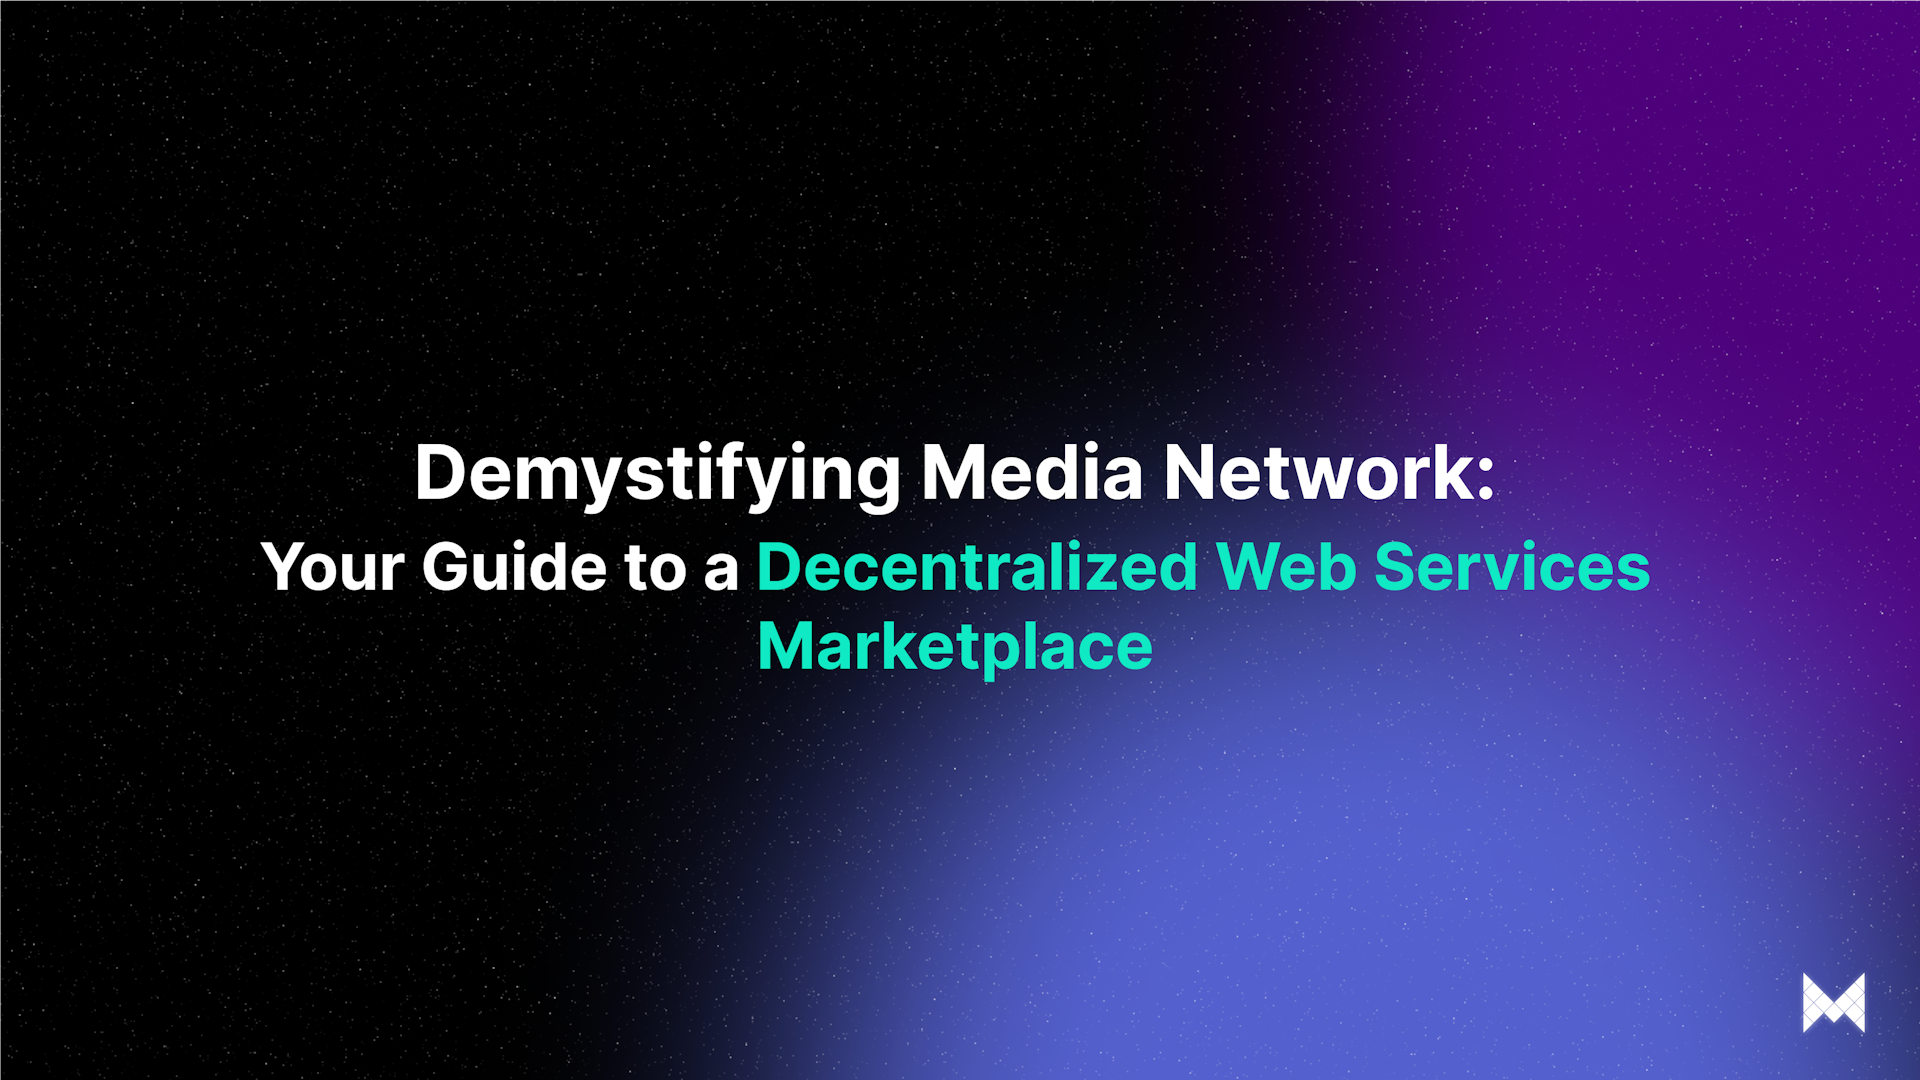 Demystifying Media Network: Your Guide to a Decentralized Web Services Marketplace